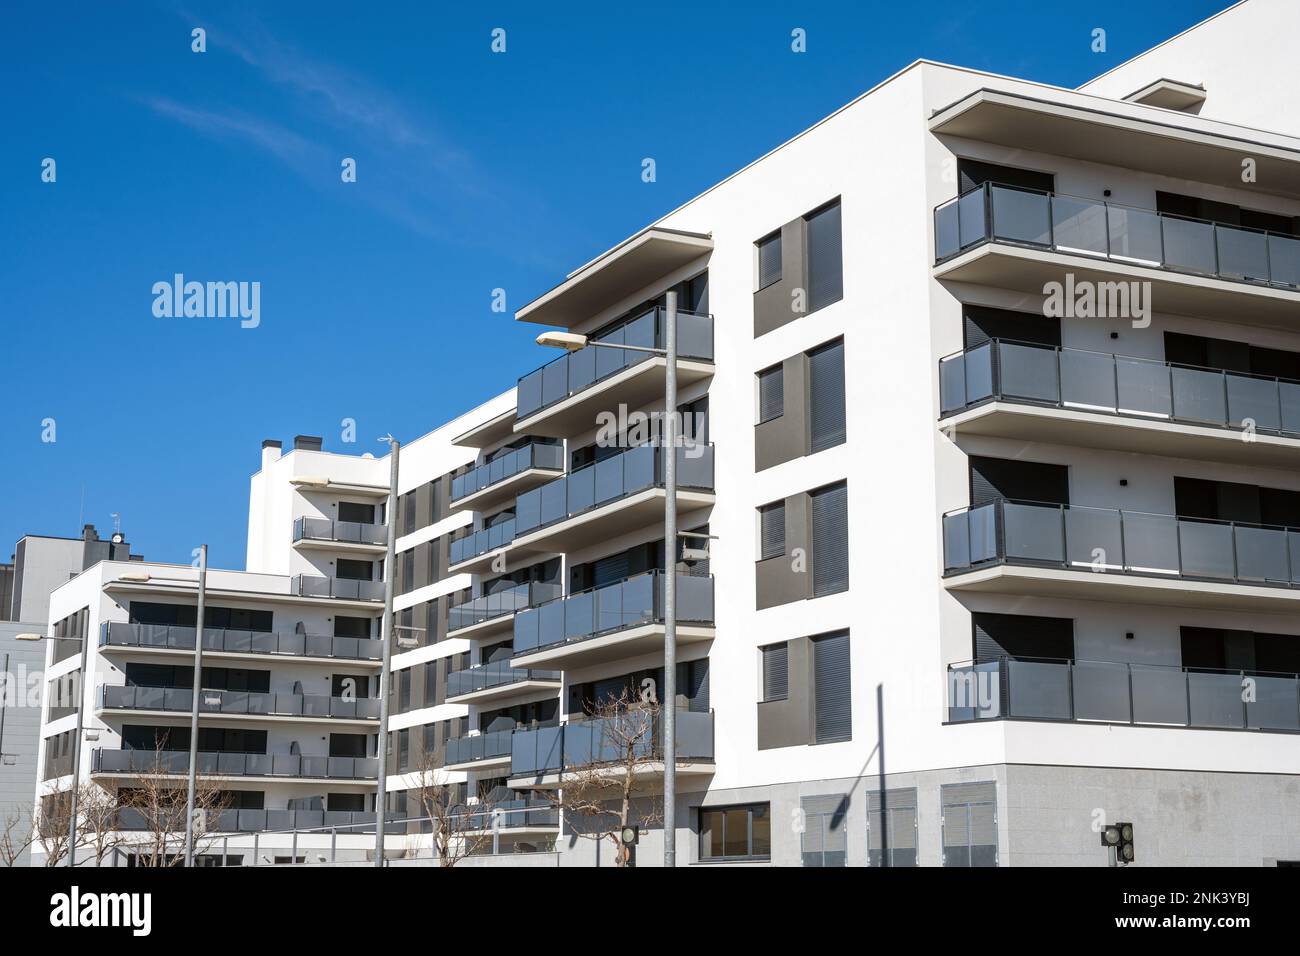 New white apartment building with balconies seen in Barcelona, Spain Stock Photo